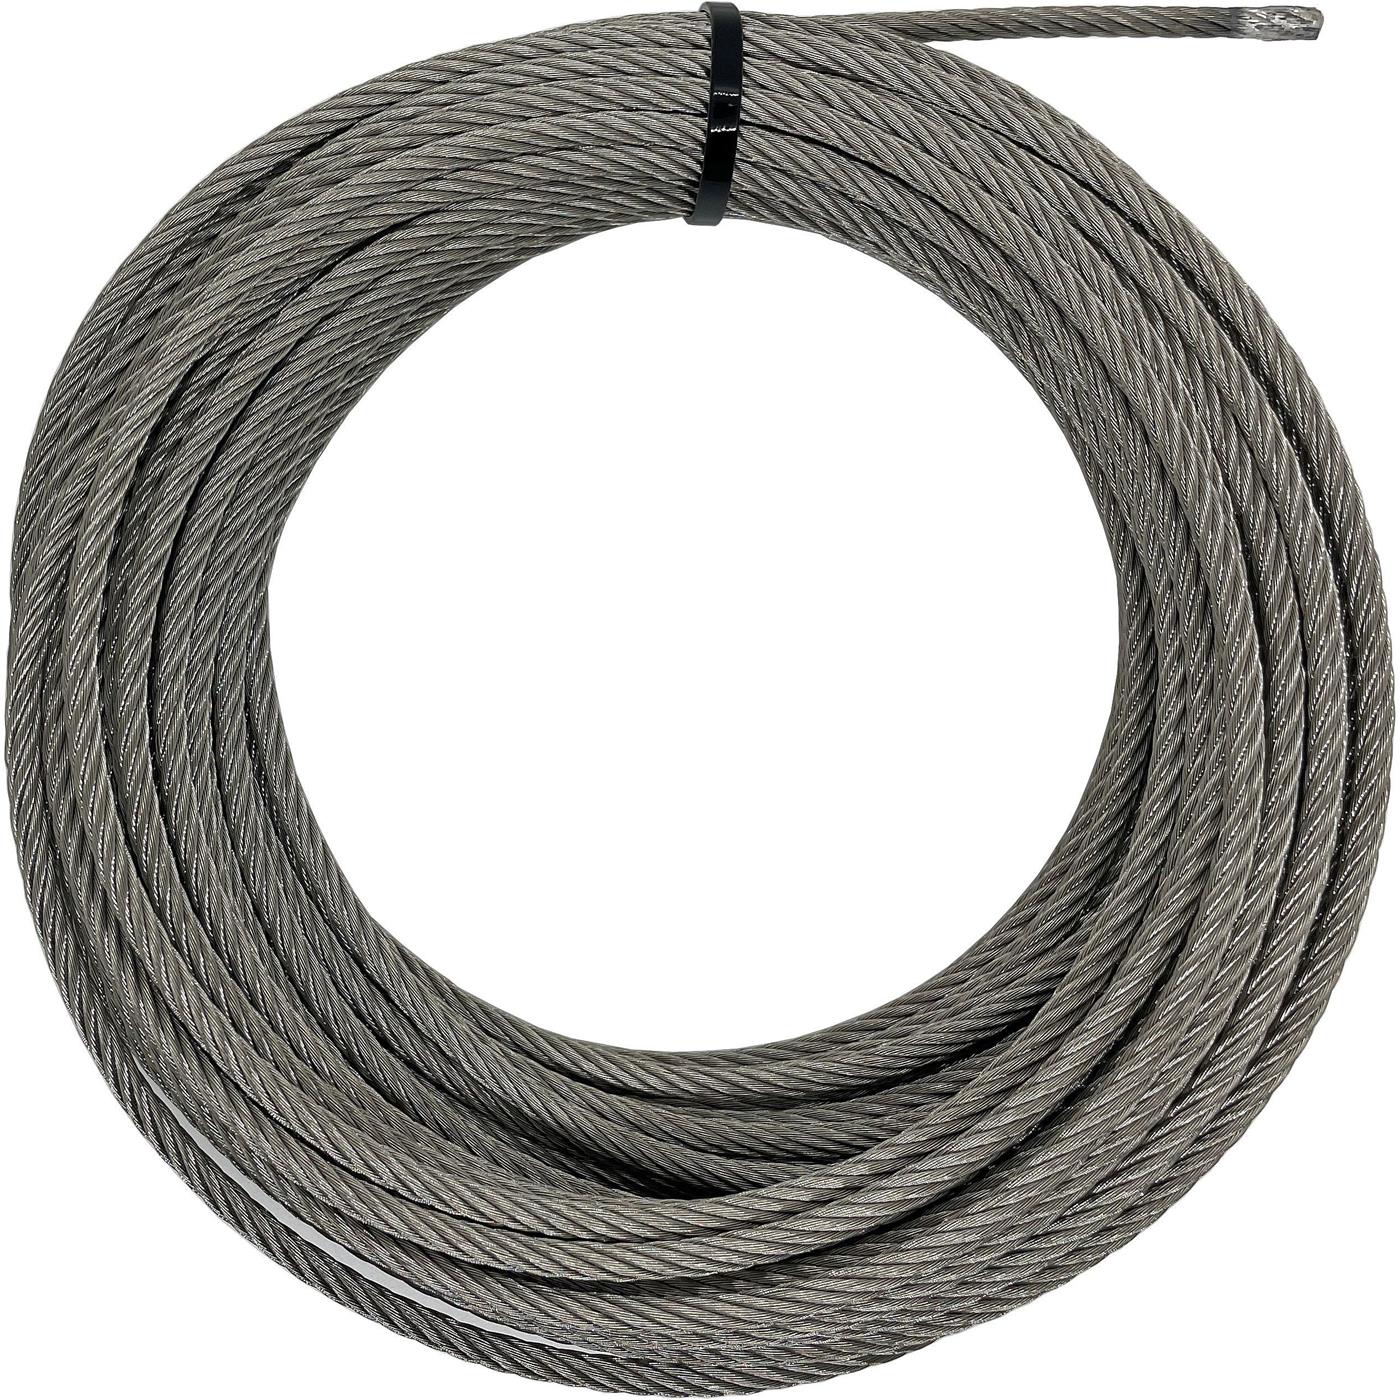 Wire rope 25m Stainless steel V4A 316 5mm 7x19 Ropes stainless for trellis systems